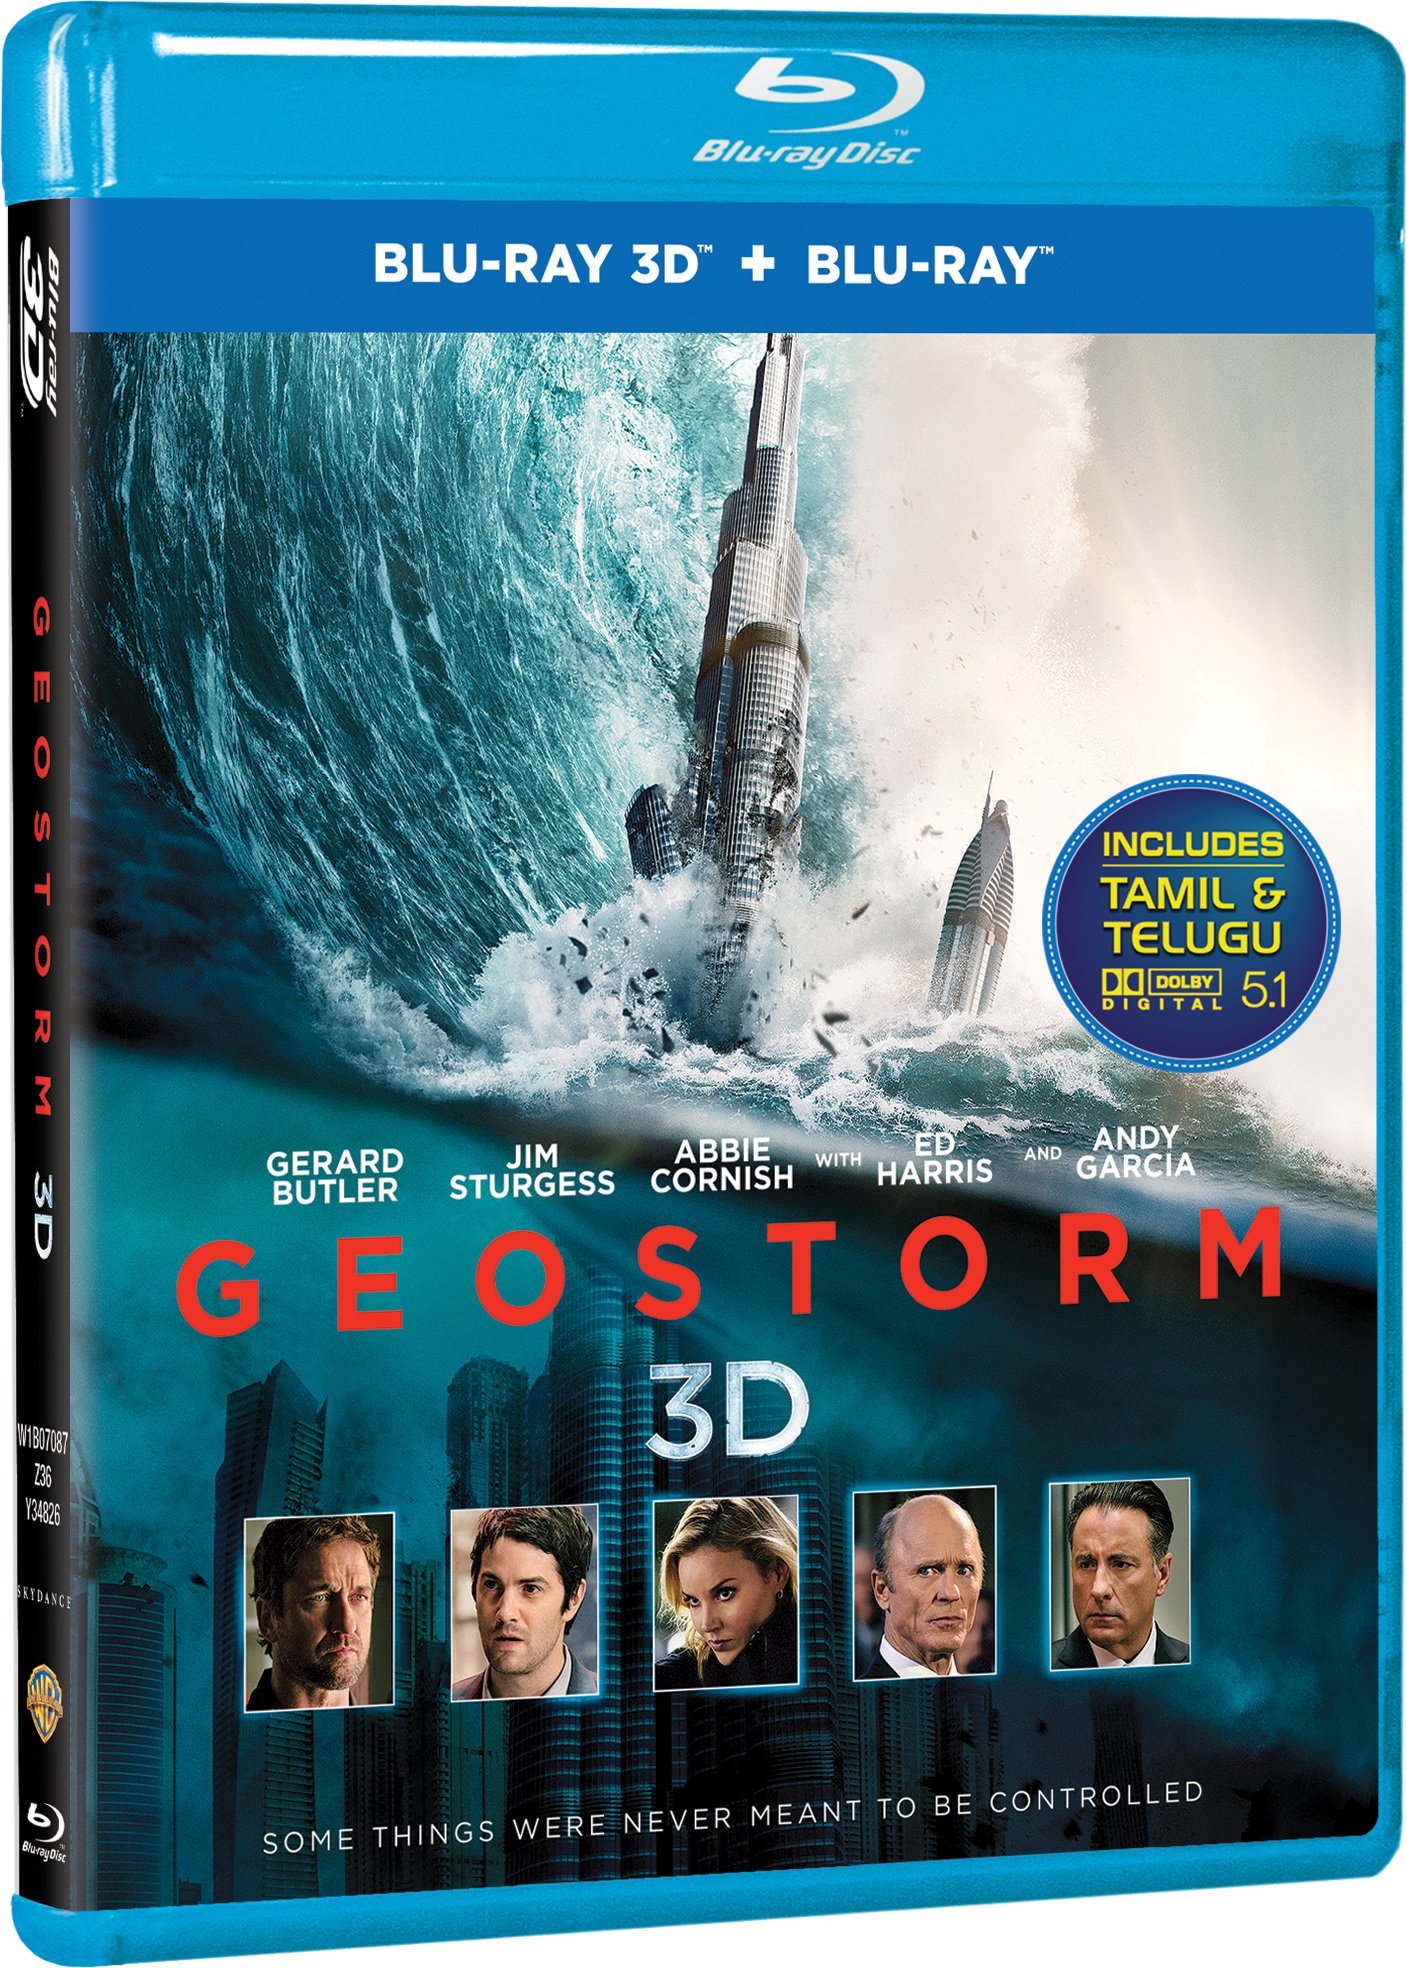 geostorm-blu-ray-3d-blu-ray-movie-purchase-or-watch-online